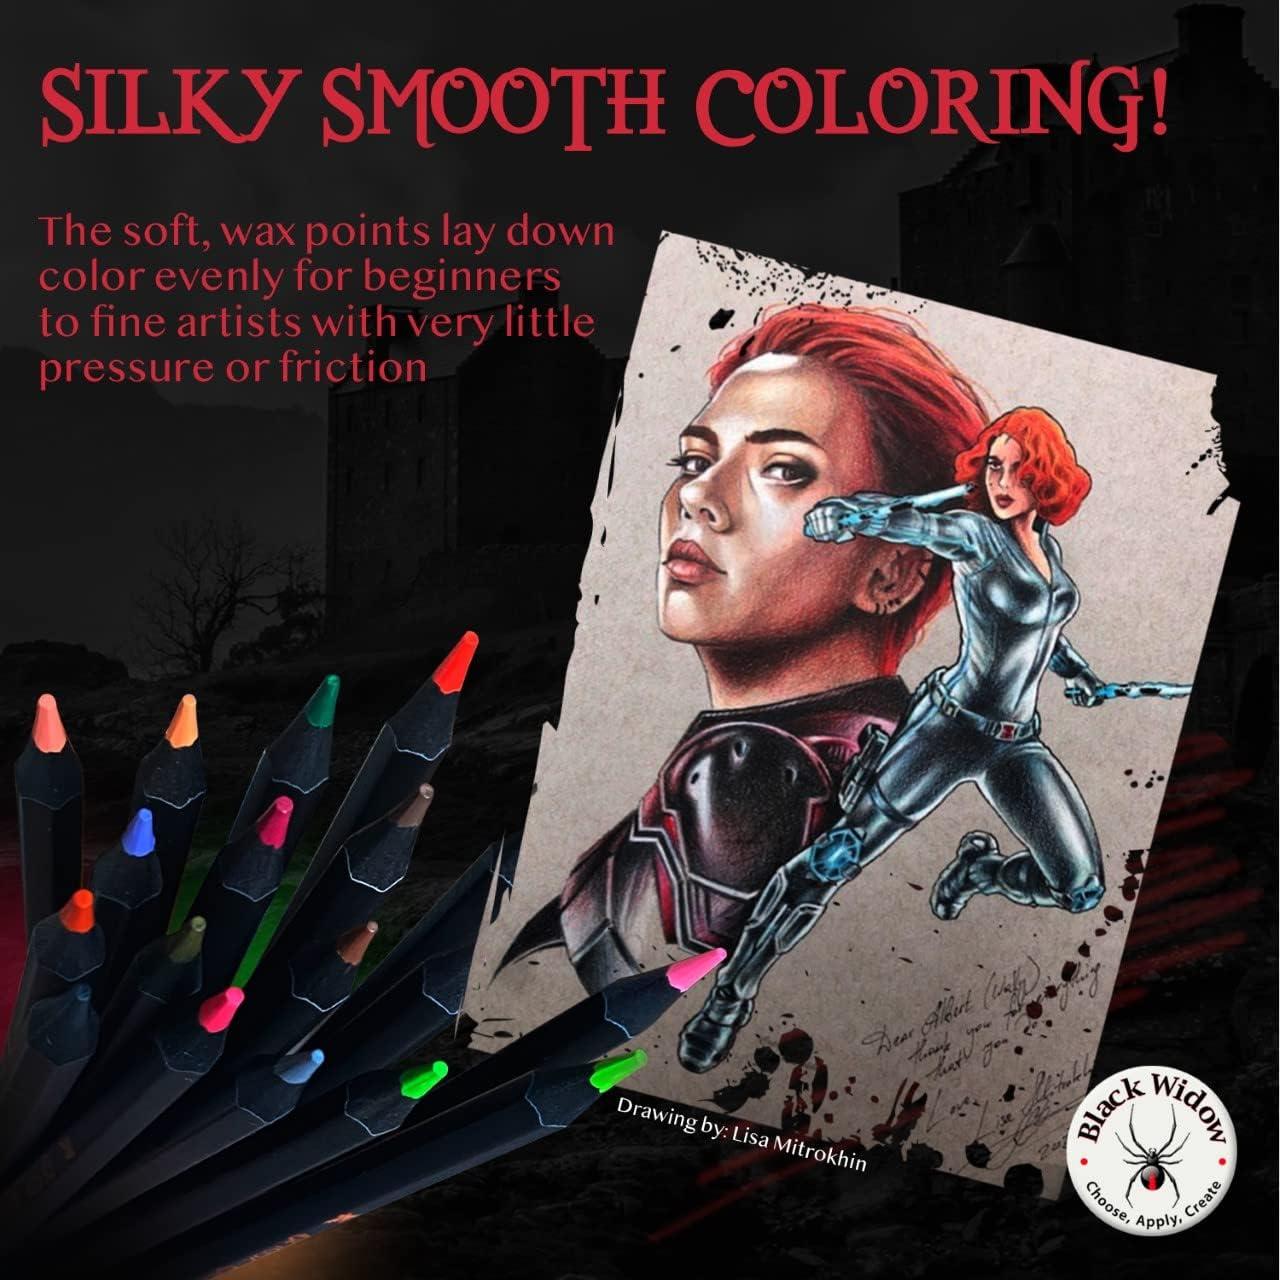  Black Widow Monarch Colored Pencils For Adult Coloring - 48 Coloring  Pencils With Smooth Pigments - Best Color Pencil Set For Adult Coloring  Books And Drawing. : Arts, Crafts & Sewing